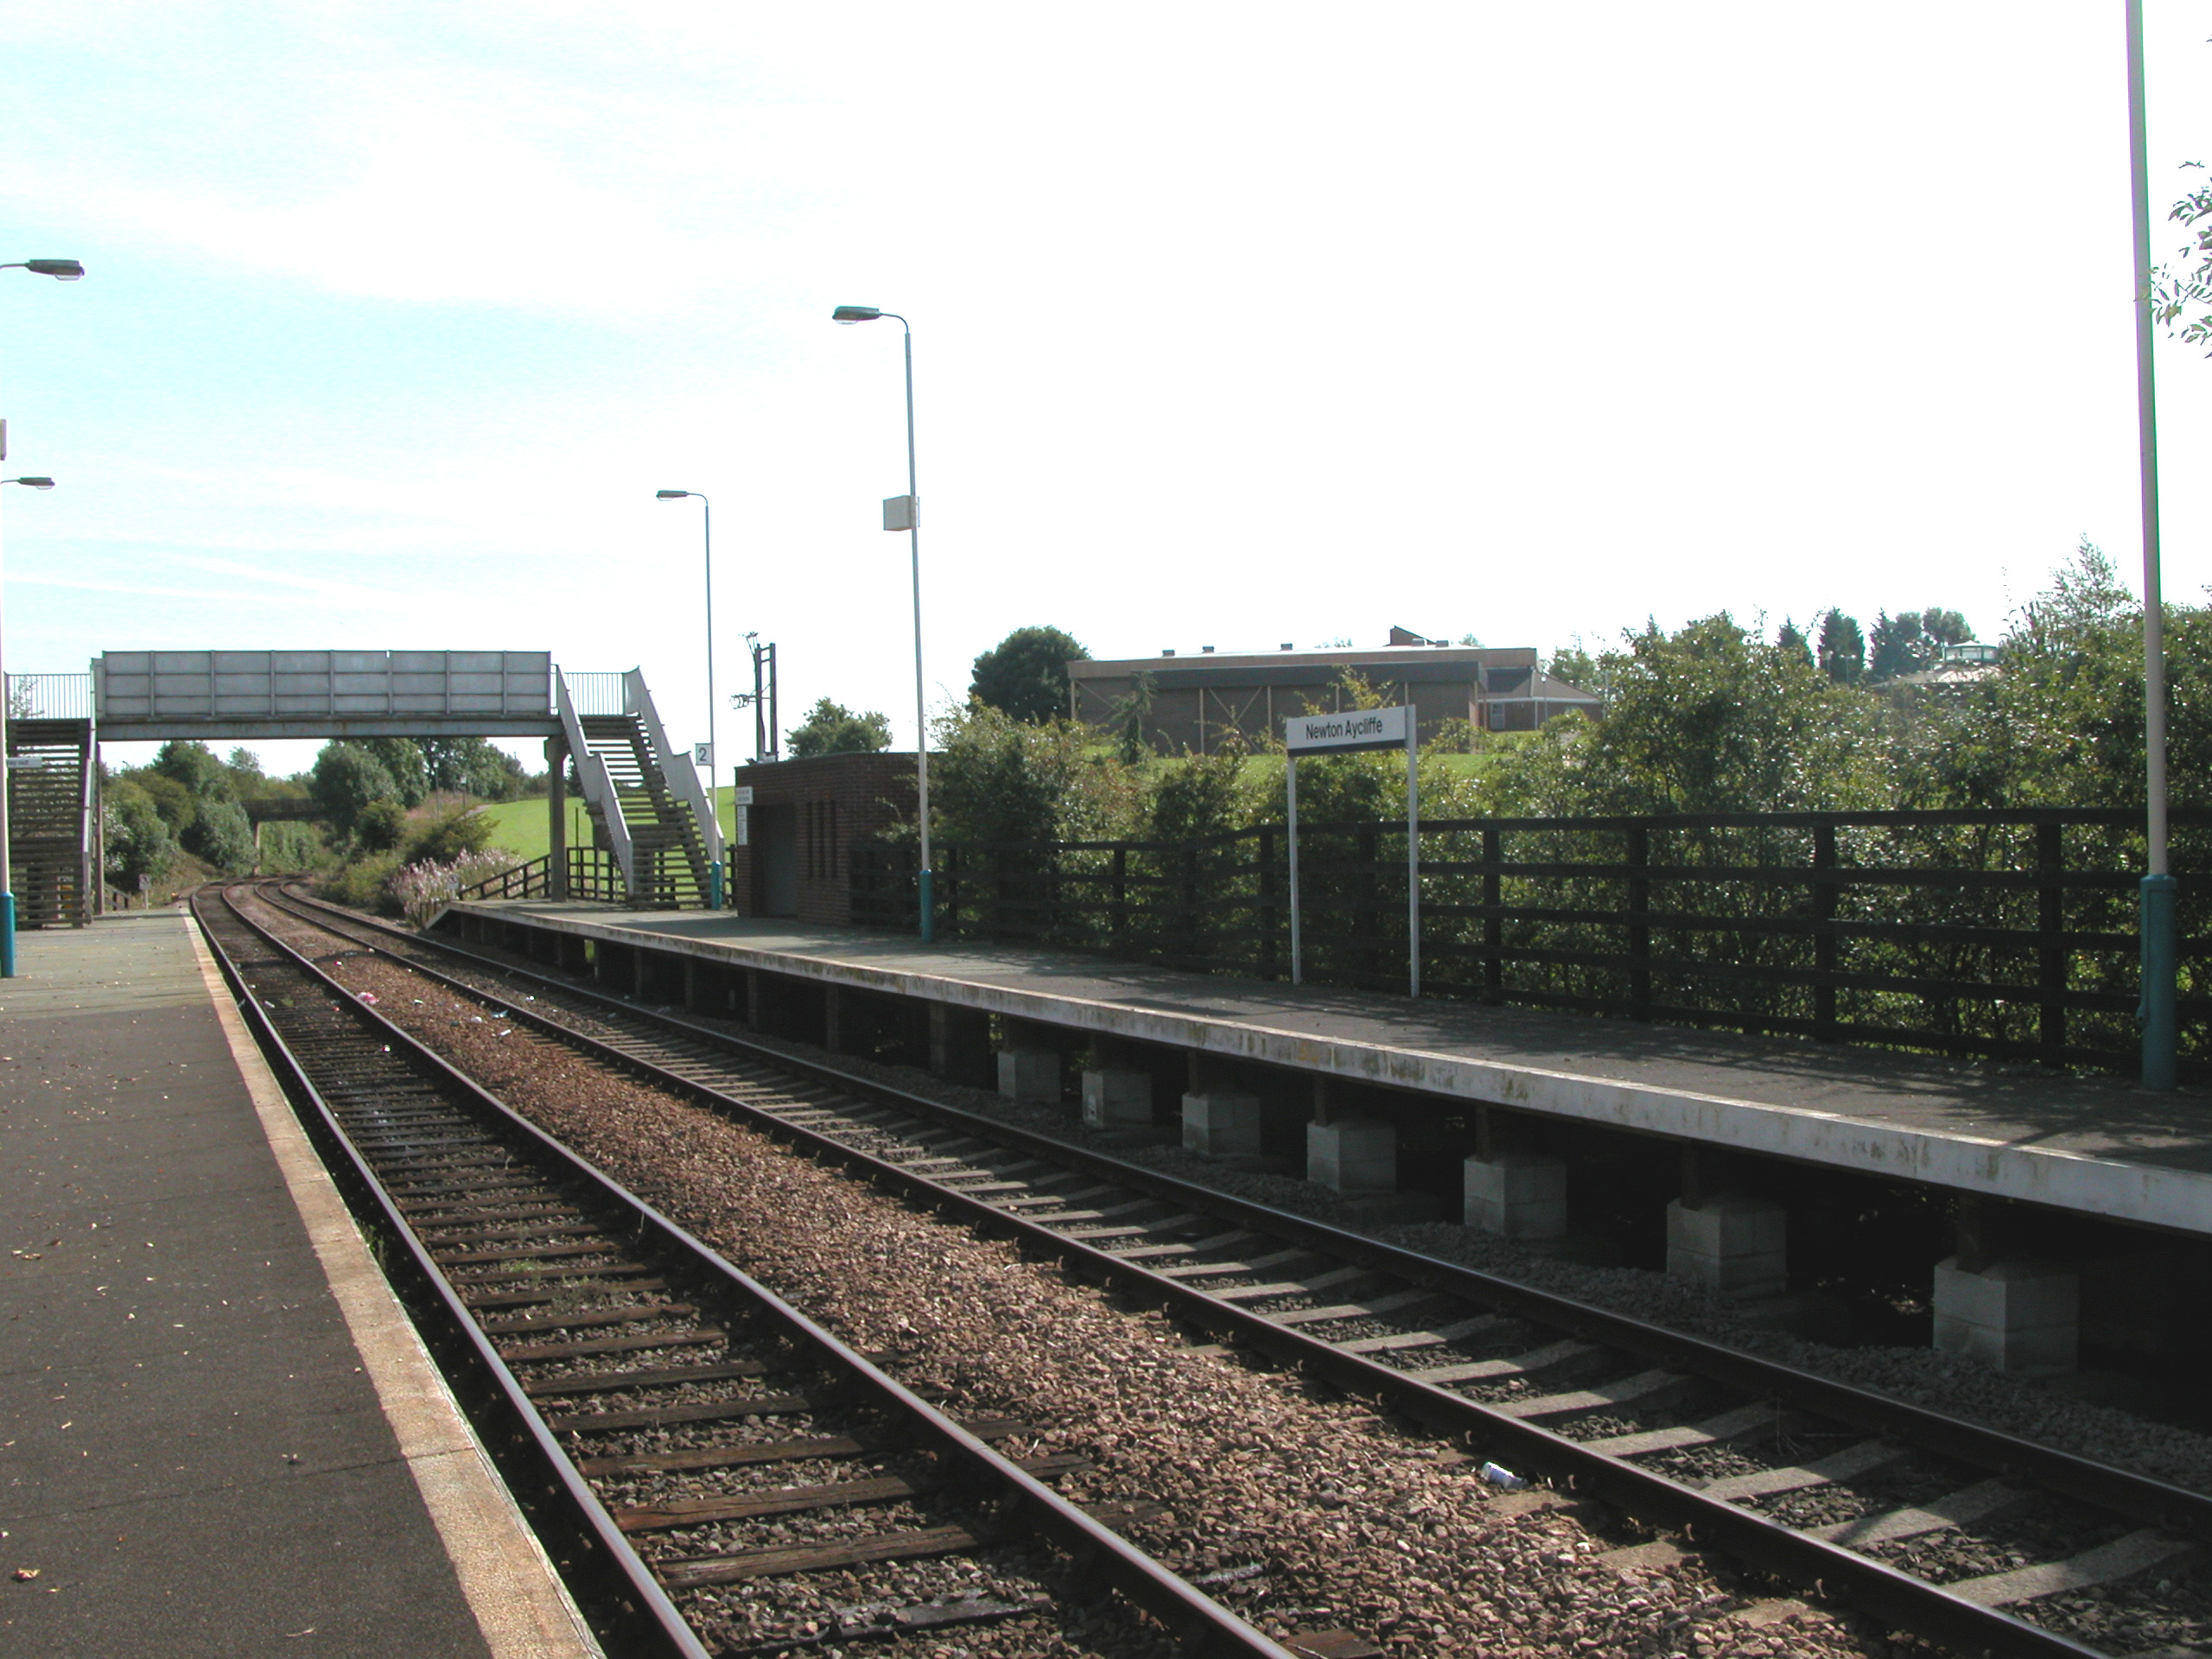 Benefits Won for Local People from New Rail Franchises